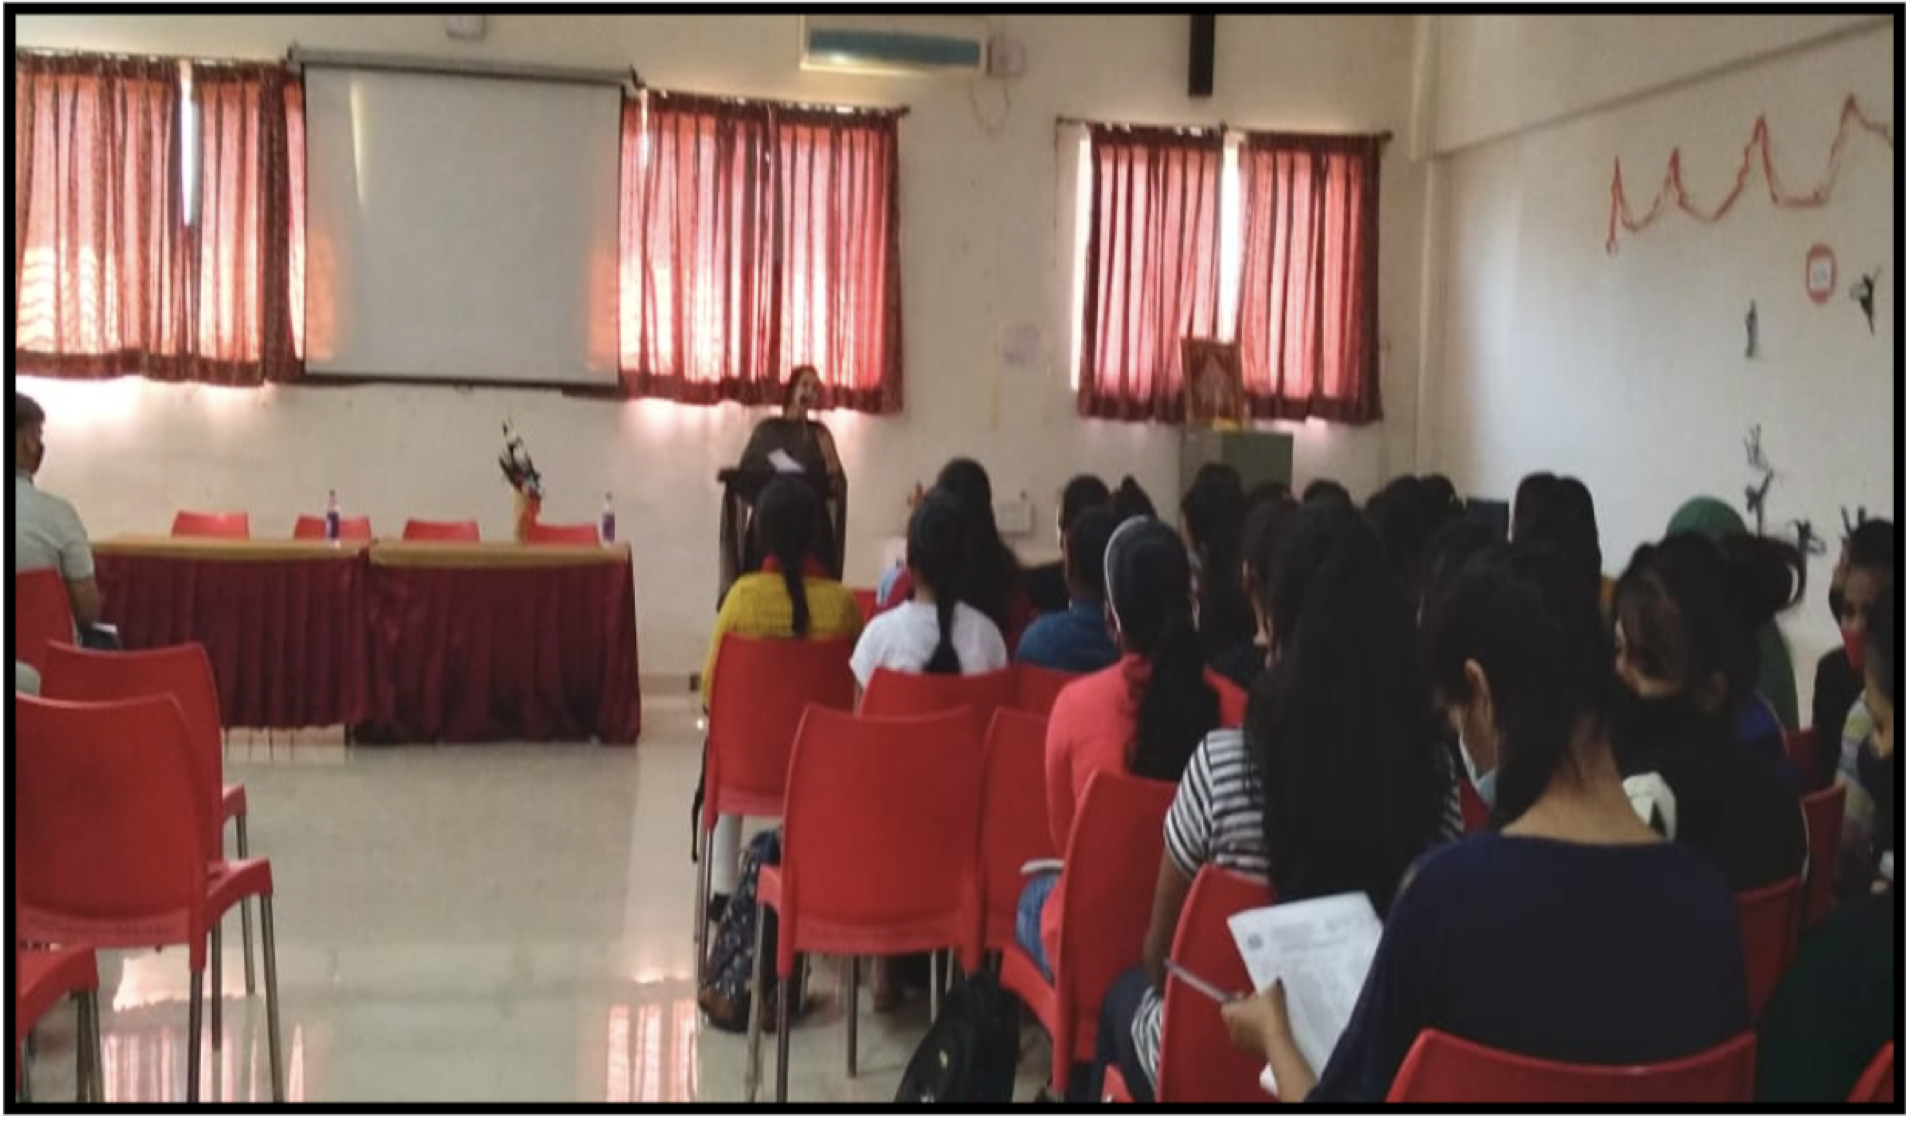 Expert lecture on “Communication skills” Program, PCP